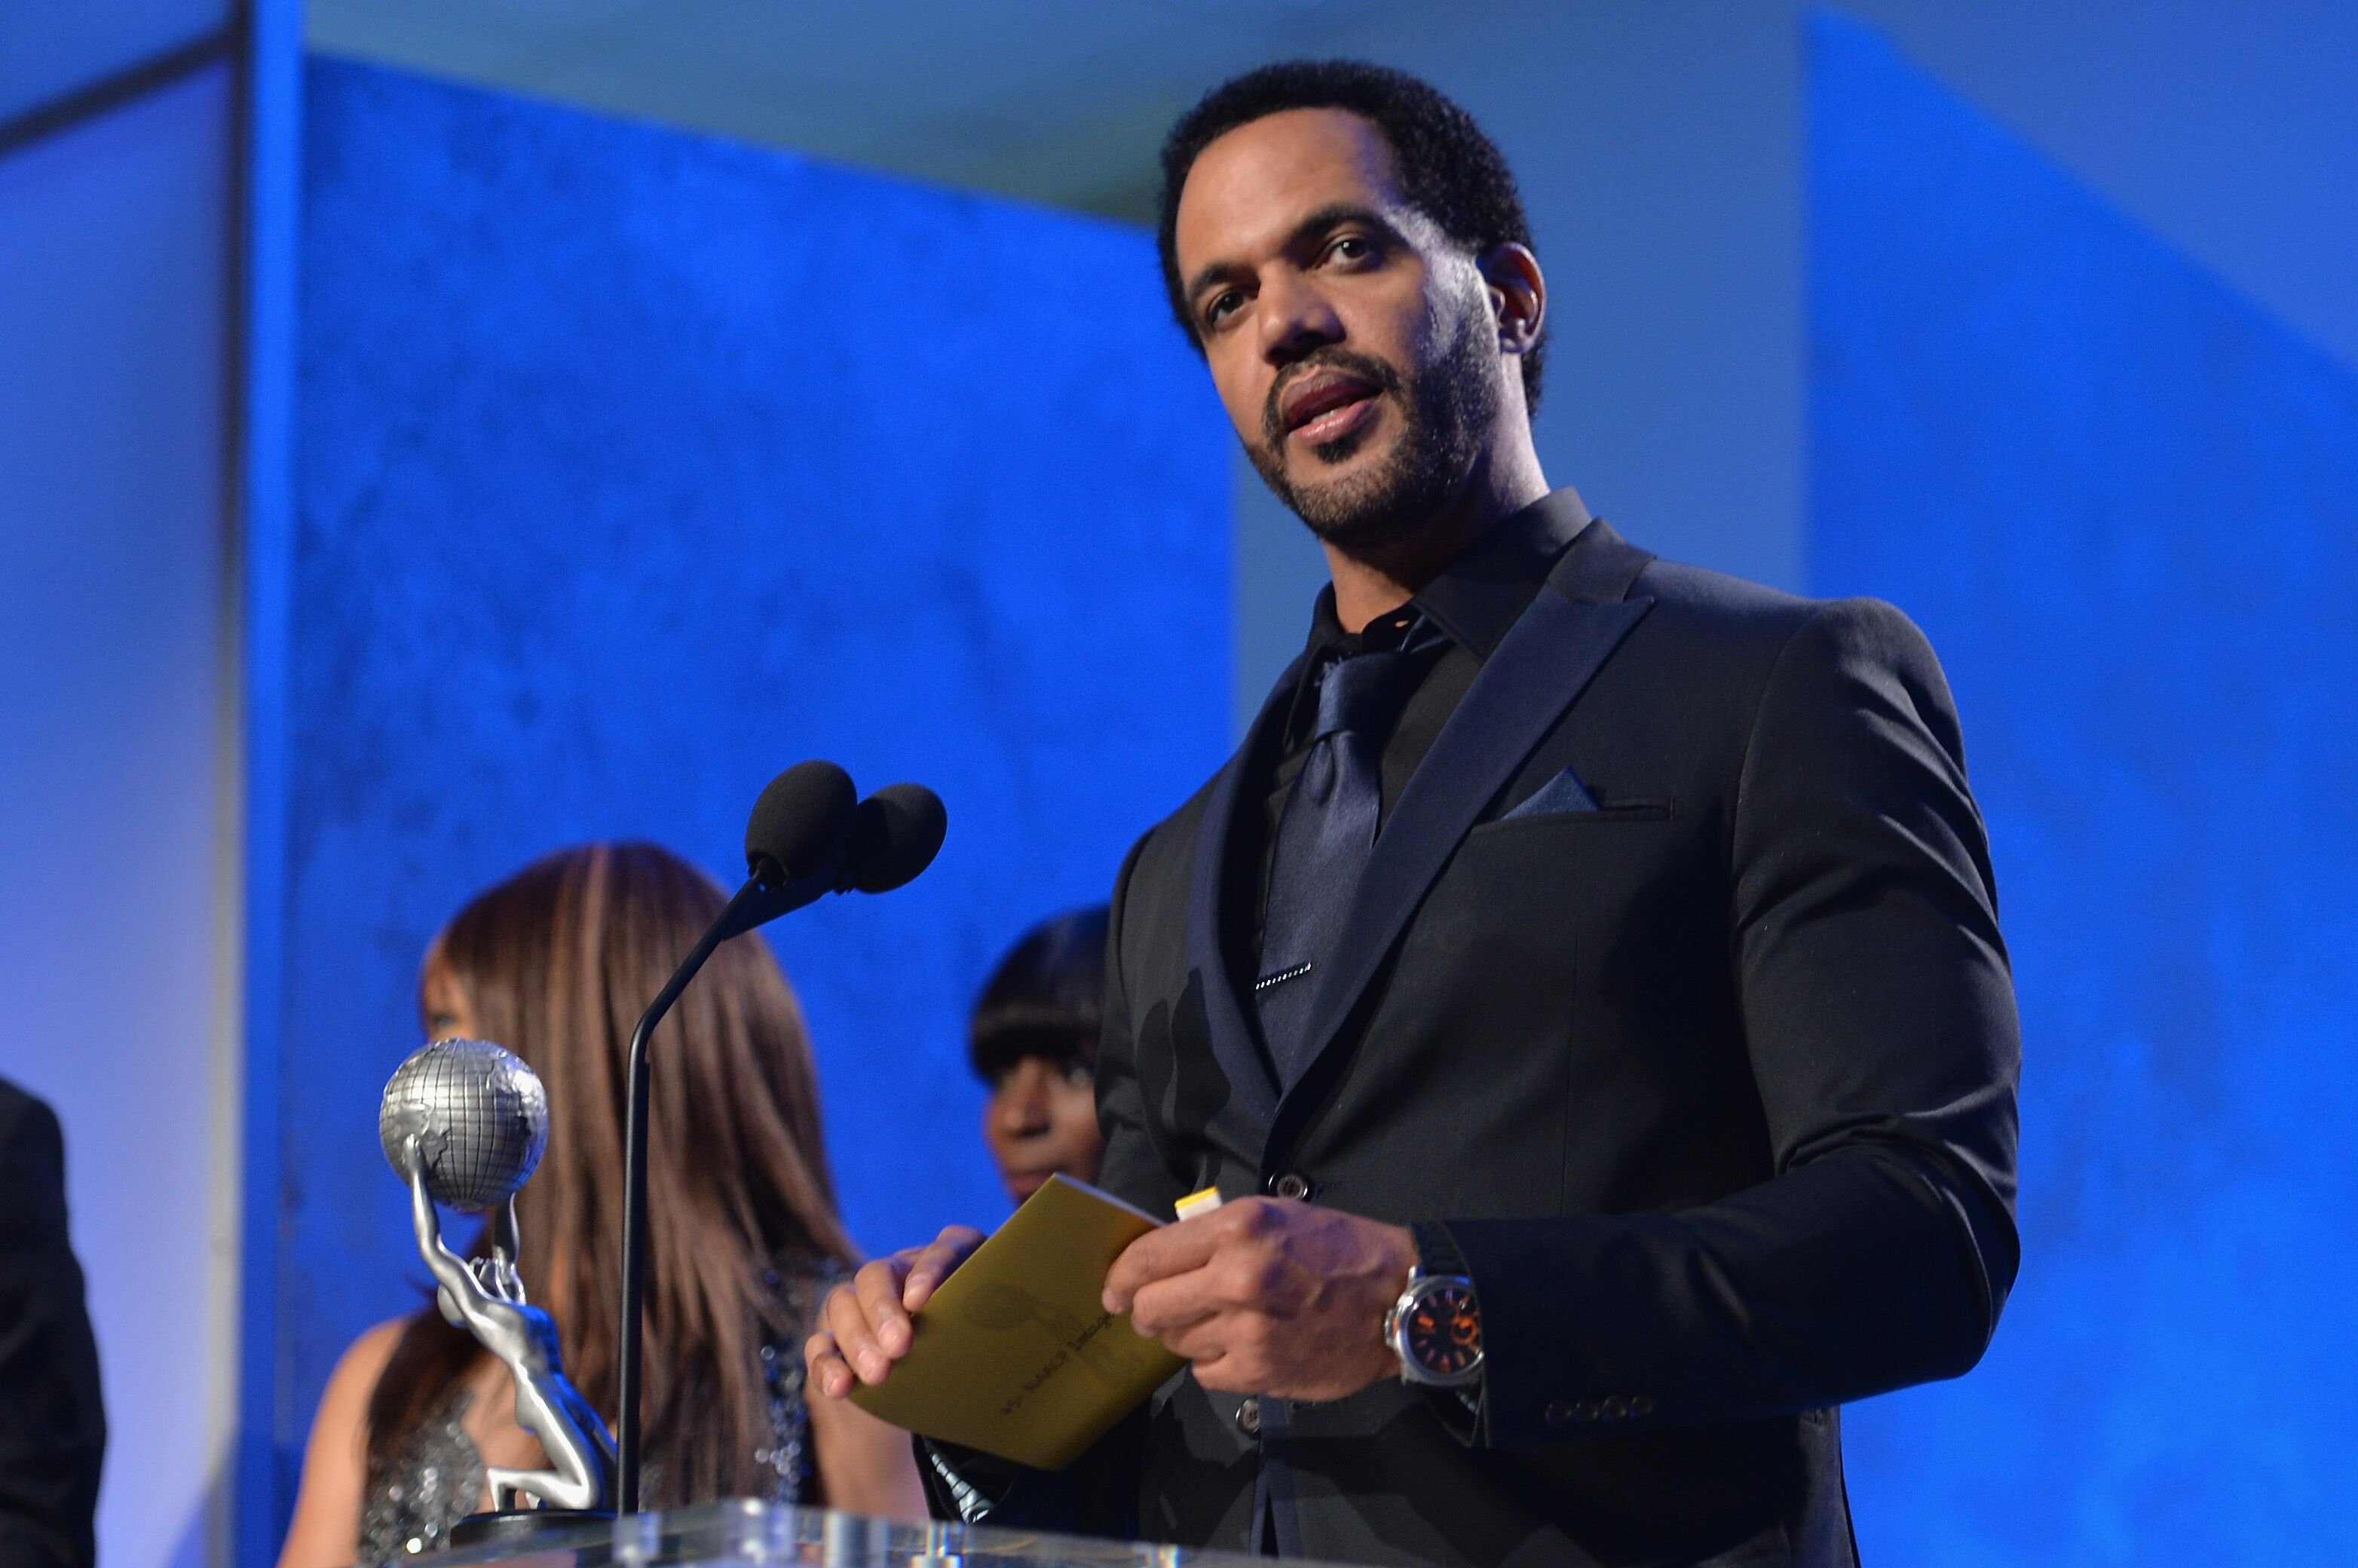 Kristoff St. John at the 45th NAACP Awards Ceremony at the Pasadena Civic Auditorium | Photo: Getty Images